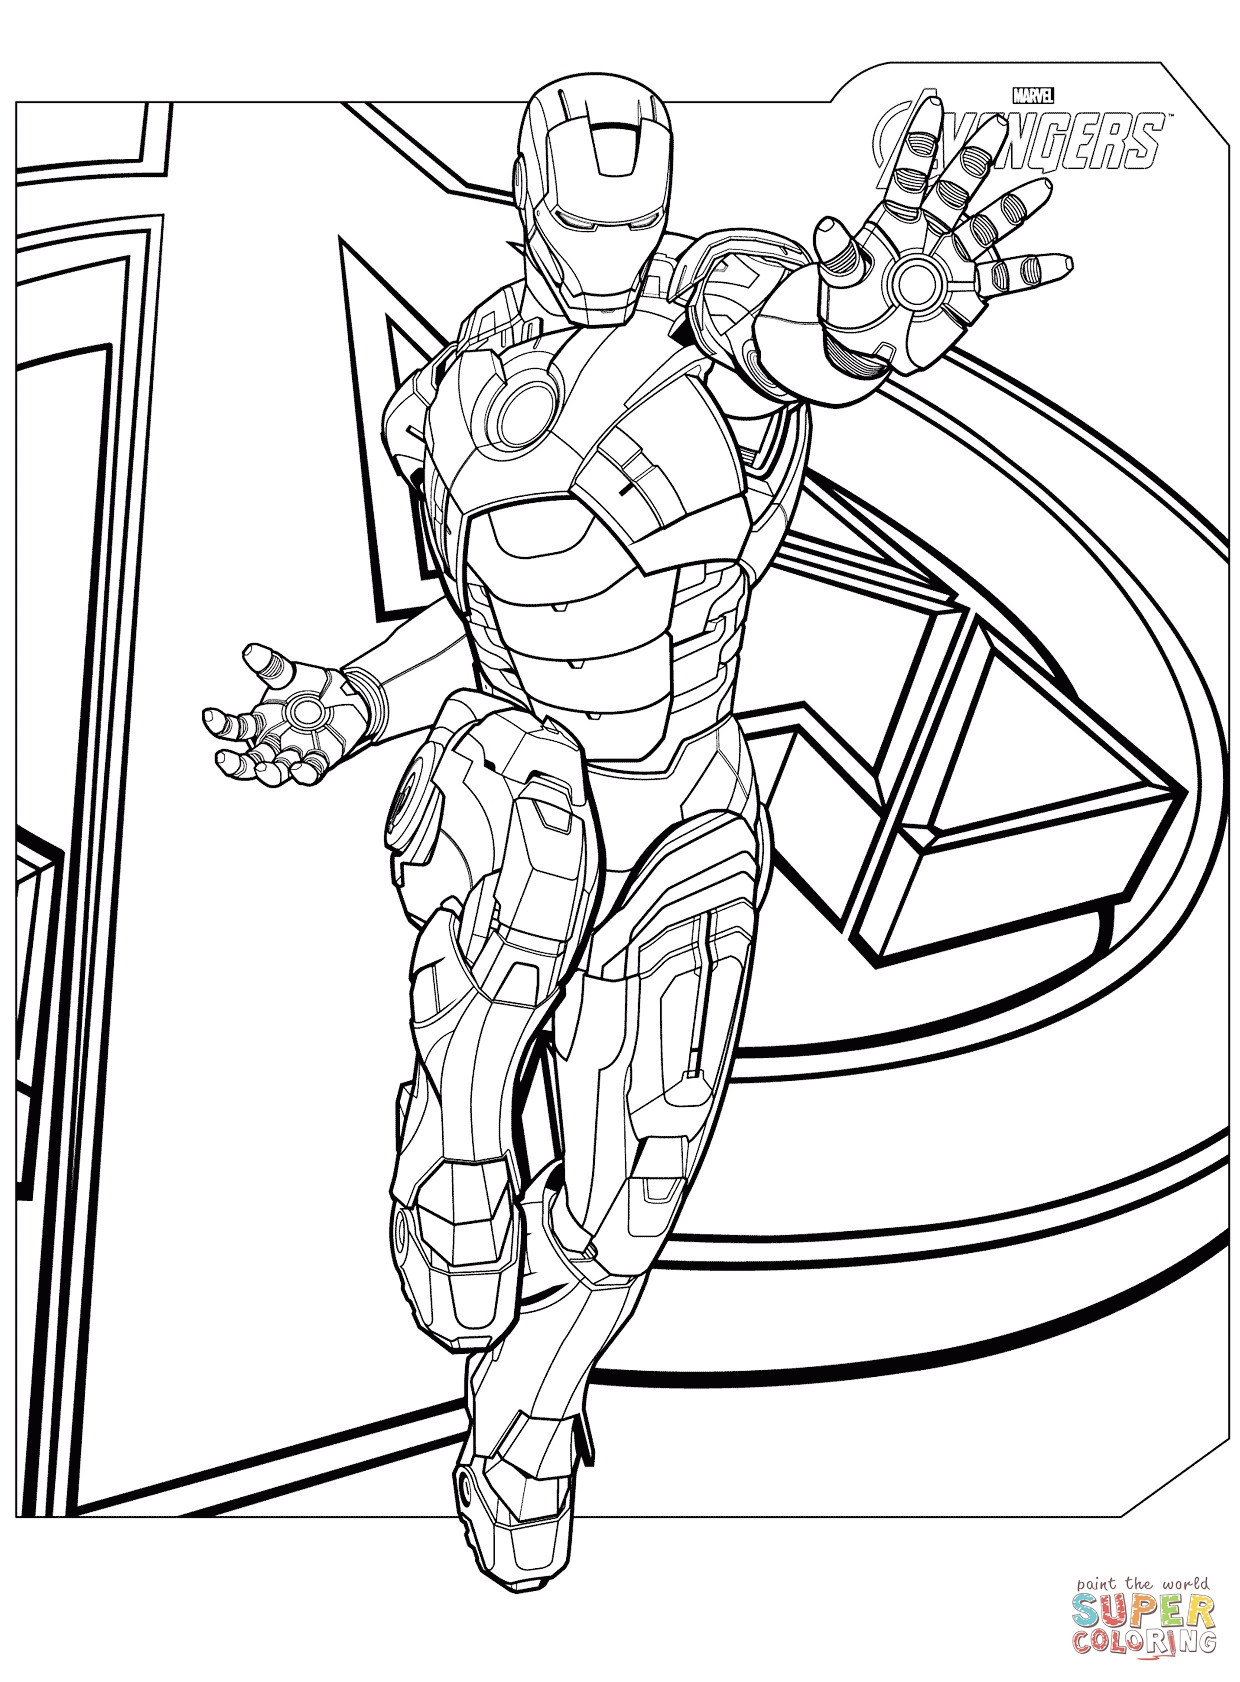 Iron Spider Coloring Pages at GetColorings.com | Free ...